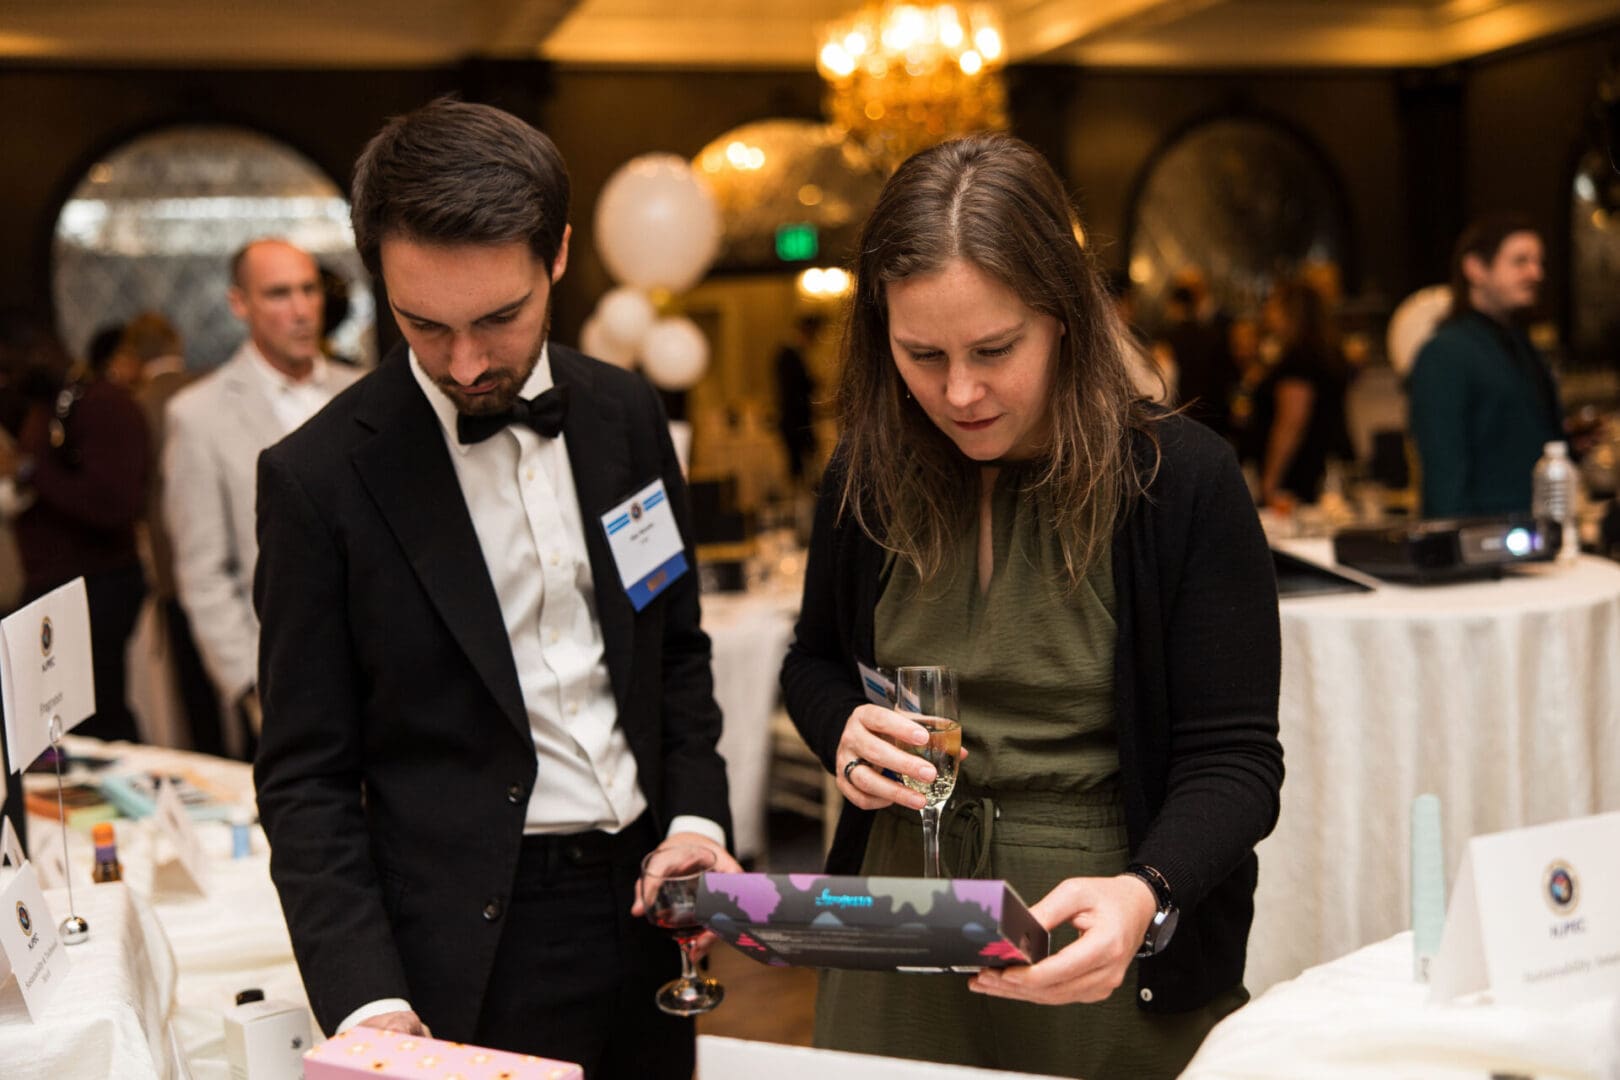 A man and woman looking at a gift at a party.